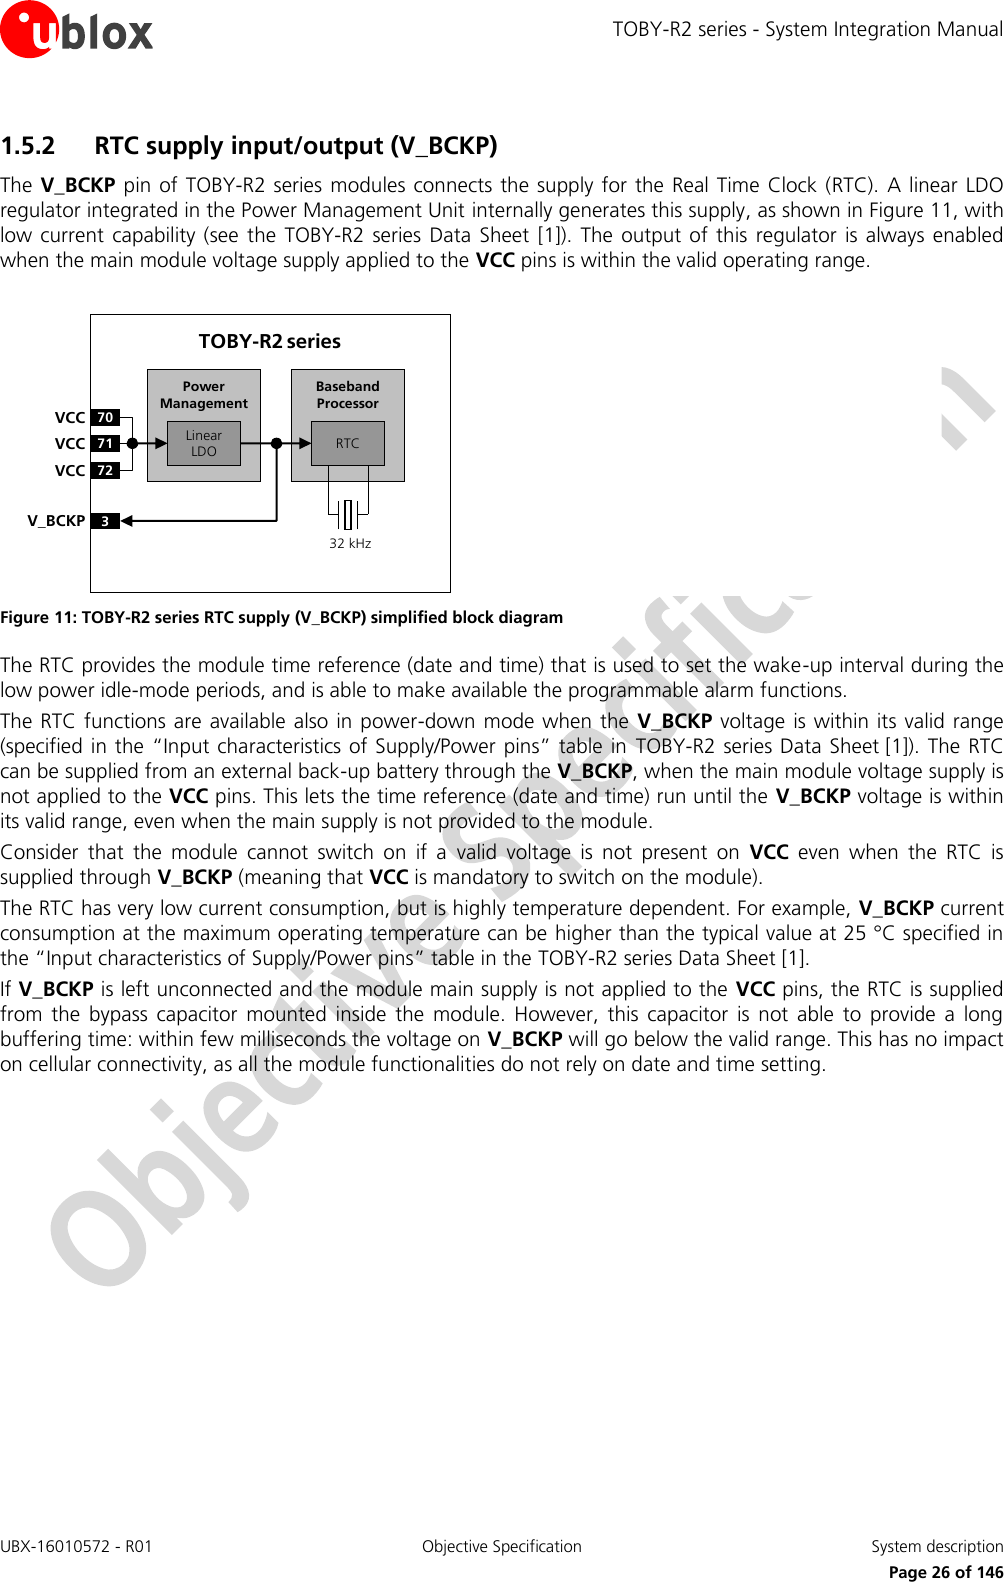 TOBY-R2 series - System Integration Manual UBX-16010572 - R01  Objective Specification  System description     Page 26 of 146 1.5.2 RTC supply input/output (V_BCKP)  The V_BCKP pin  of  TOBY-R2 series  modules connects  the supply for the Real Time  Clock  (RTC). A linear LDO regulator integrated in the Power Management Unit internally generates this supply, as shown in Figure 11, with low current  capability (see  the  TOBY-R2 series Data  Sheet  [1]).  The output  of  this  regulator  is always  enabled when the main module voltage supply applied to the VCC pins is within the valid operating range.  Baseband Processor70VCC71VCC72VCC3V_BCKPLinear LDOPower ManagementTOBY-R2 series32 kHzRTC Figure 11: TOBY-R2 series RTC supply (V_BCKP) simplified block diagram The RTC provides the module time reference (date and time) that is used to set the wake-up interval during the low power idle-mode periods, and is able to make available the programmable alarm functions. The RTC functions are available also in power-down  mode when the  V_BCKP voltage  is within its valid range (specified in the “Input characteristics of Supply/Power pins” table in  TOBY-R2 series Data Sheet [1]). The RTC can be supplied from an external back-up battery through the V_BCKP, when the main module voltage supply is not applied to the VCC pins. This lets the time reference (date and time) run until the V_BCKP voltage is within its valid range, even when the main supply is not provided to the module. Consider  that  the  module  cannot  switch  on  if  a  valid  voltage  is  not  present  on  VCC  even  when  the  RTC  is supplied through V_BCKP (meaning that VCC is mandatory to switch on the module). The RTC has very low current consumption, but is highly temperature dependent. For example, V_BCKP current consumption at the maximum operating temperature can be higher than the typical value at 25 °C specified in the “Input characteristics of Supply/Power pins” table in the TOBY-R2 series Data Sheet [1]. If V_BCKP is left unconnected and the module main supply is not applied to the VCC pins, the RTC is supplied from  the  bypass  capacitor  mounted  inside  the  module.  However,  this  capacitor  is  not  able  to  provide  a  long buffering time: within few milliseconds the voltage on V_BCKP will go below the valid range. This has no impact on cellular connectivity, as all the module functionalities do not rely on date and time setting.  